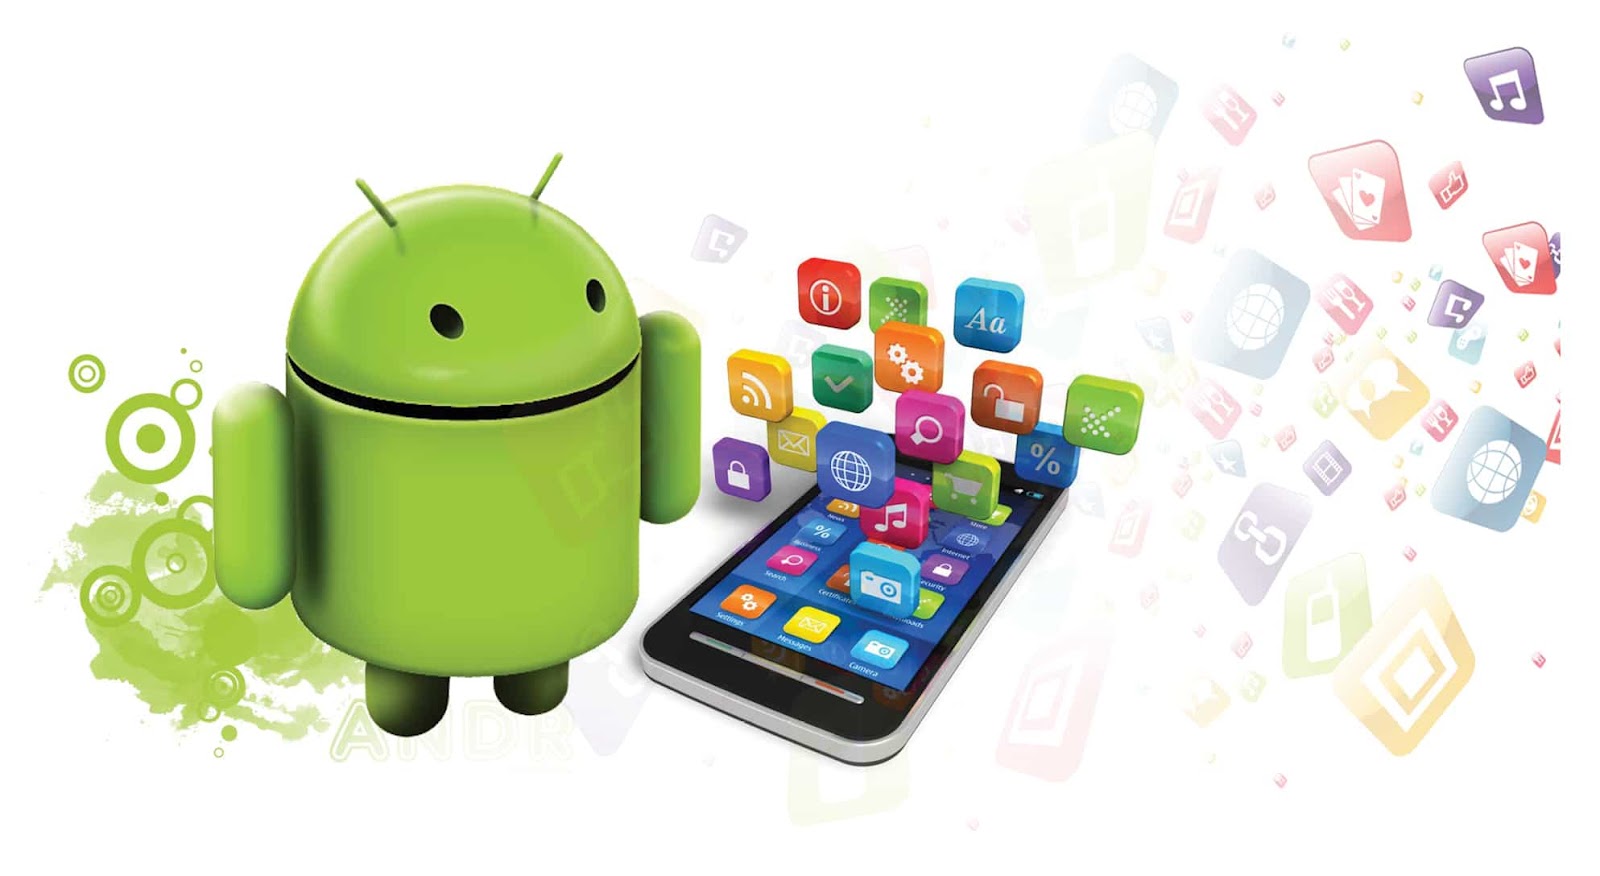 How to build the android application development for a startup with minimum budget in UK